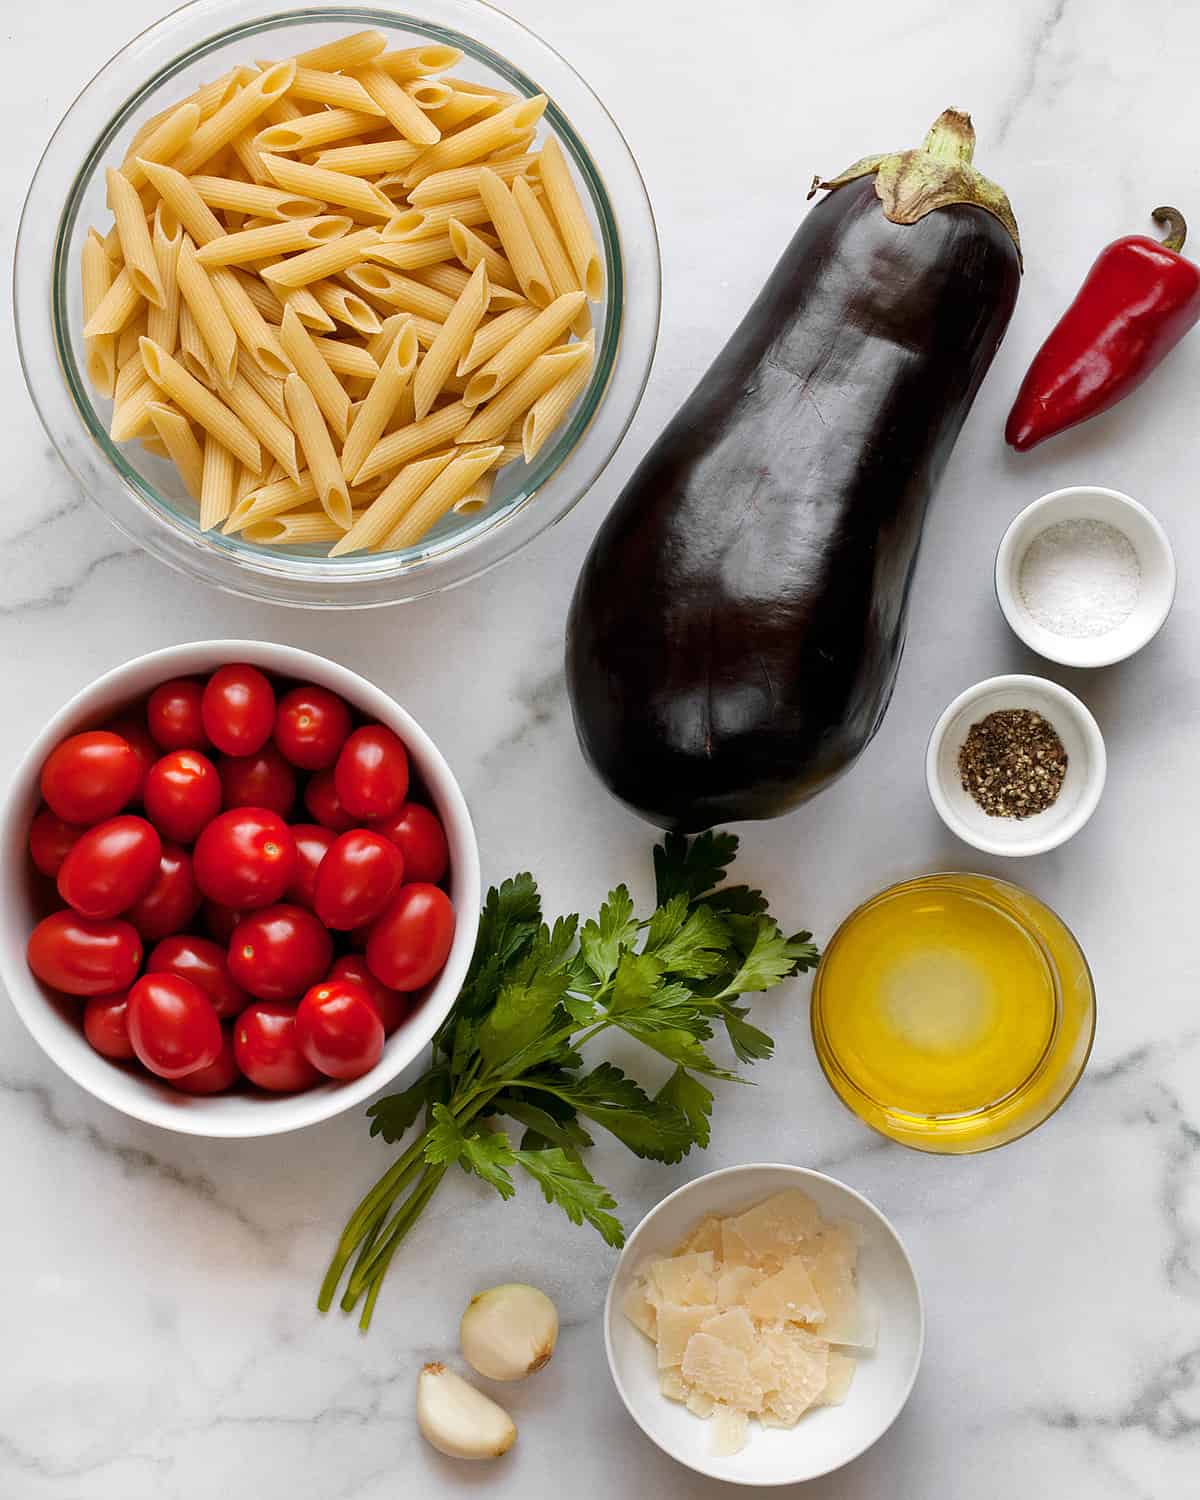 Ingredients including penne, eggplant, fresno chili, tomatoes, garlic, parsley, olive oil, salt and pepper